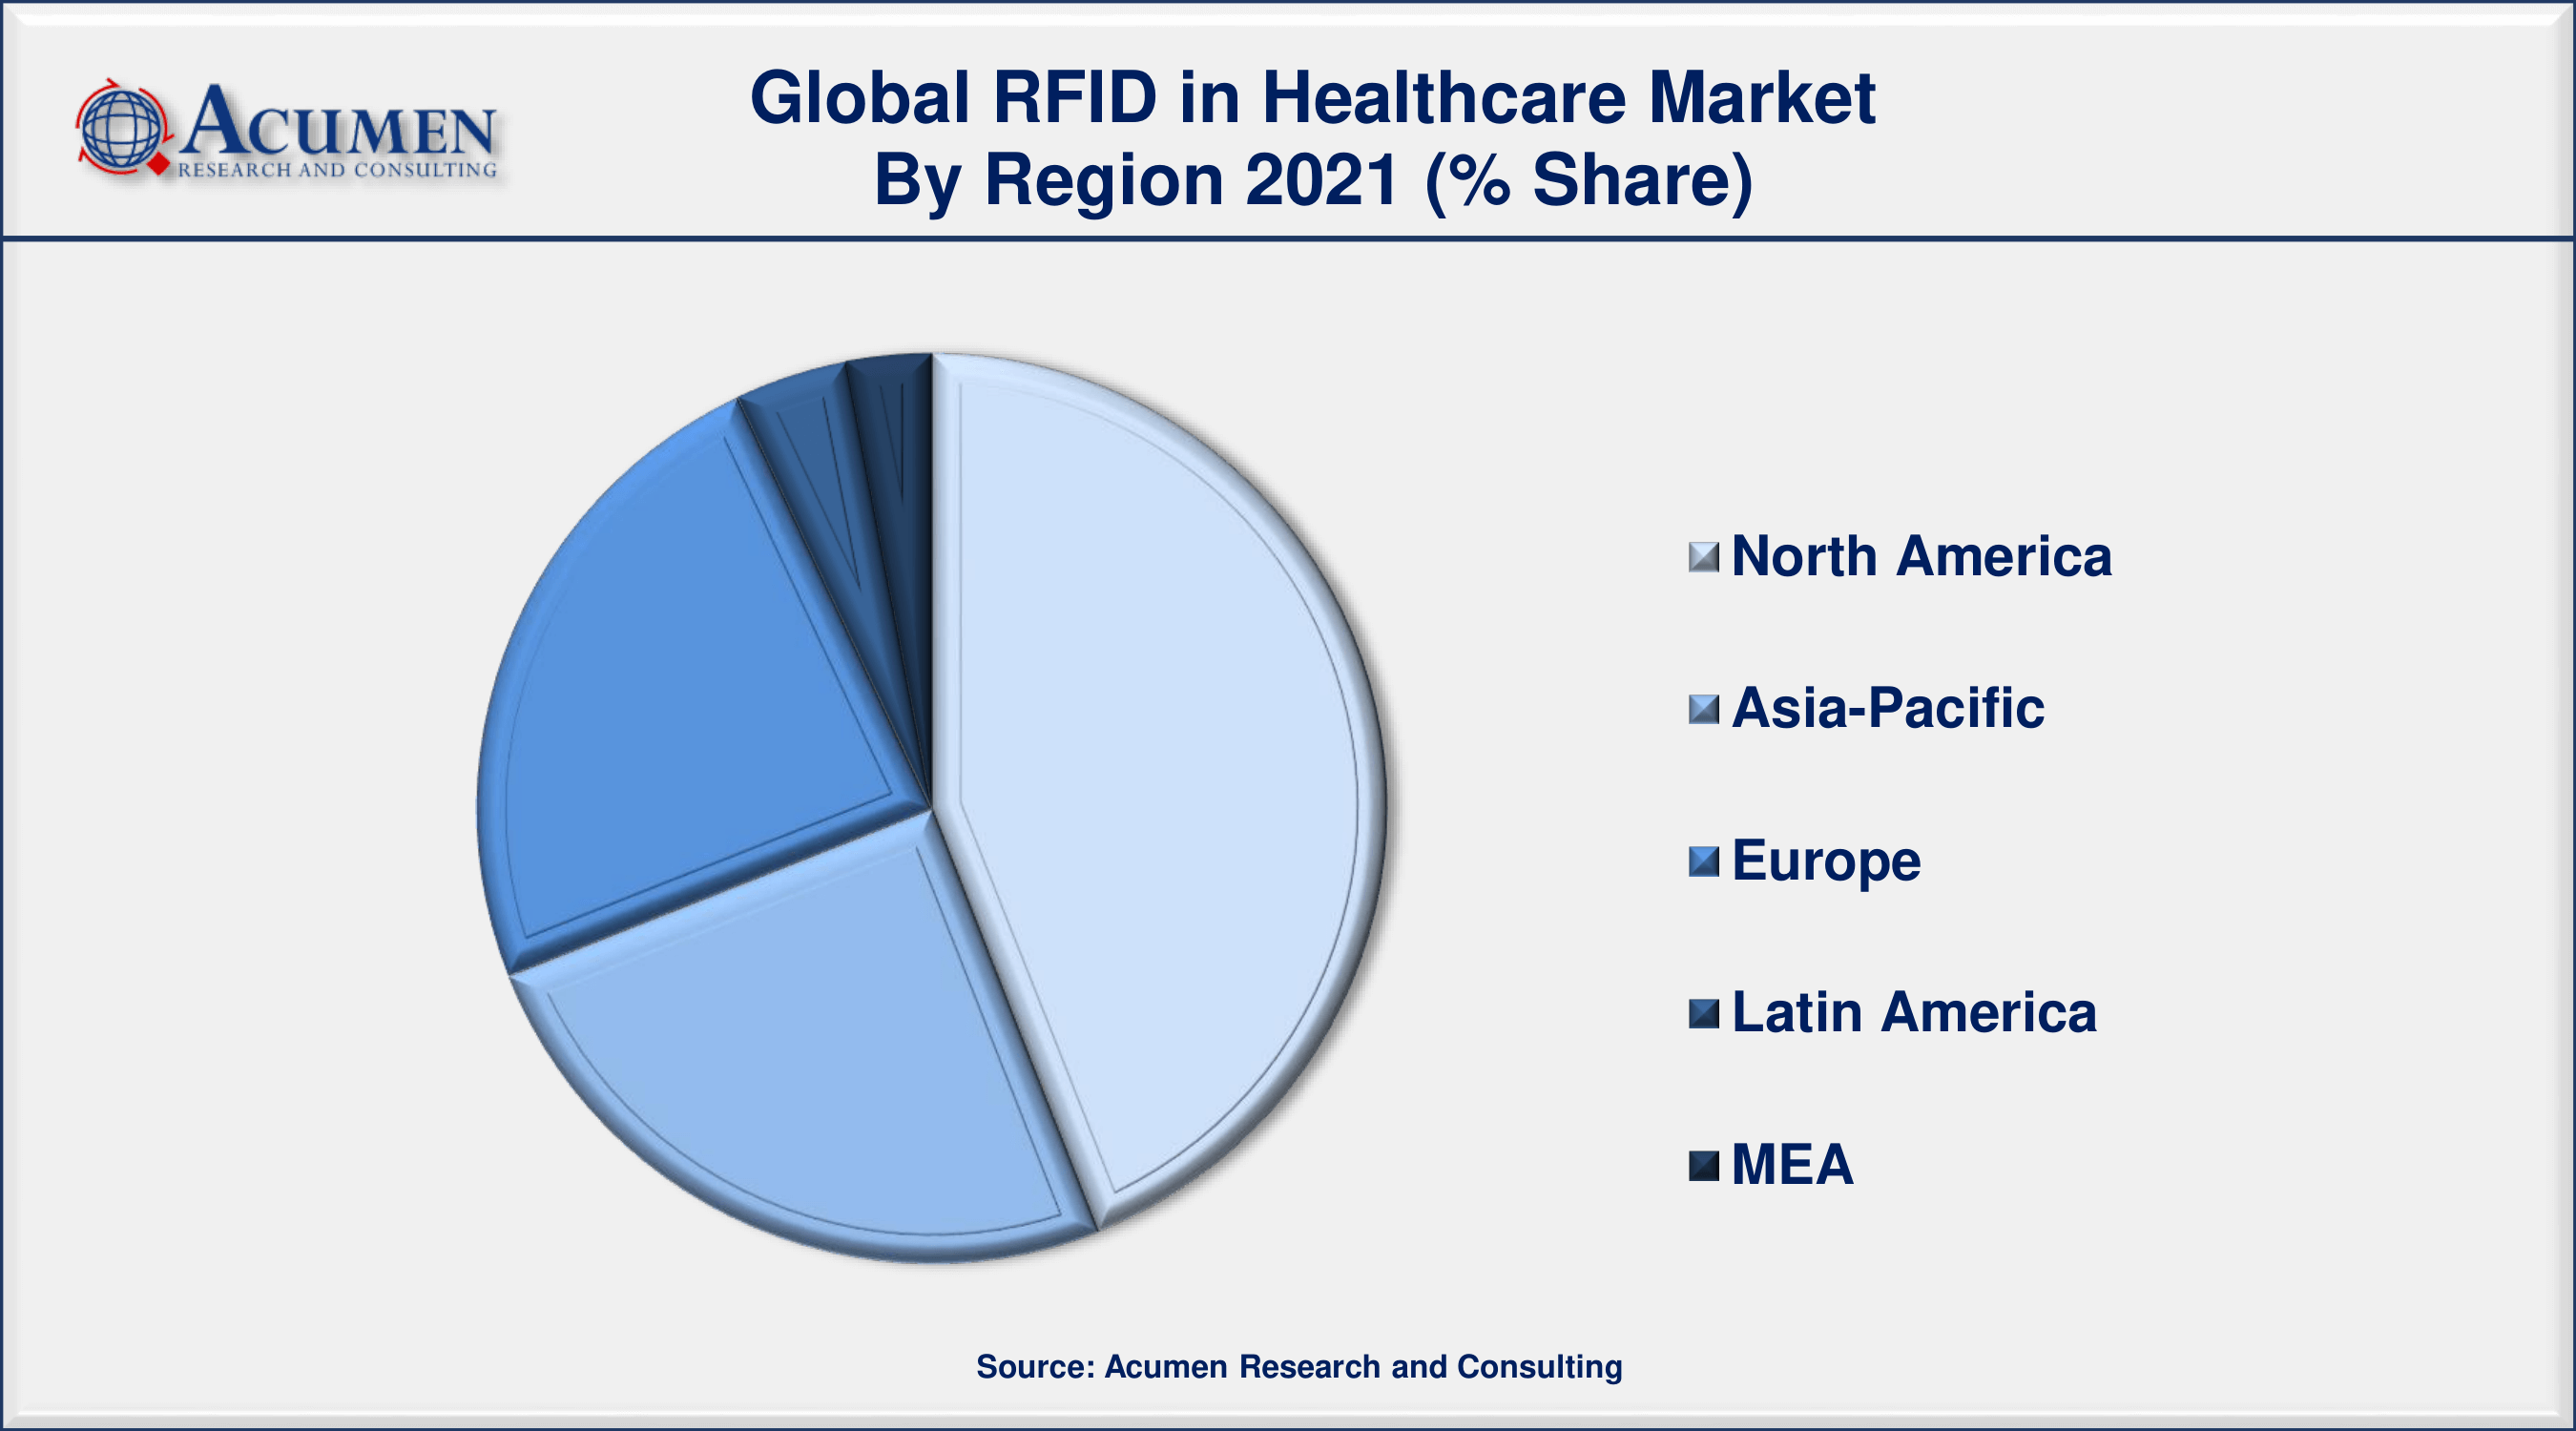 RFID In Healthcare Market to 2030 - Forecast and Competitive Analysis